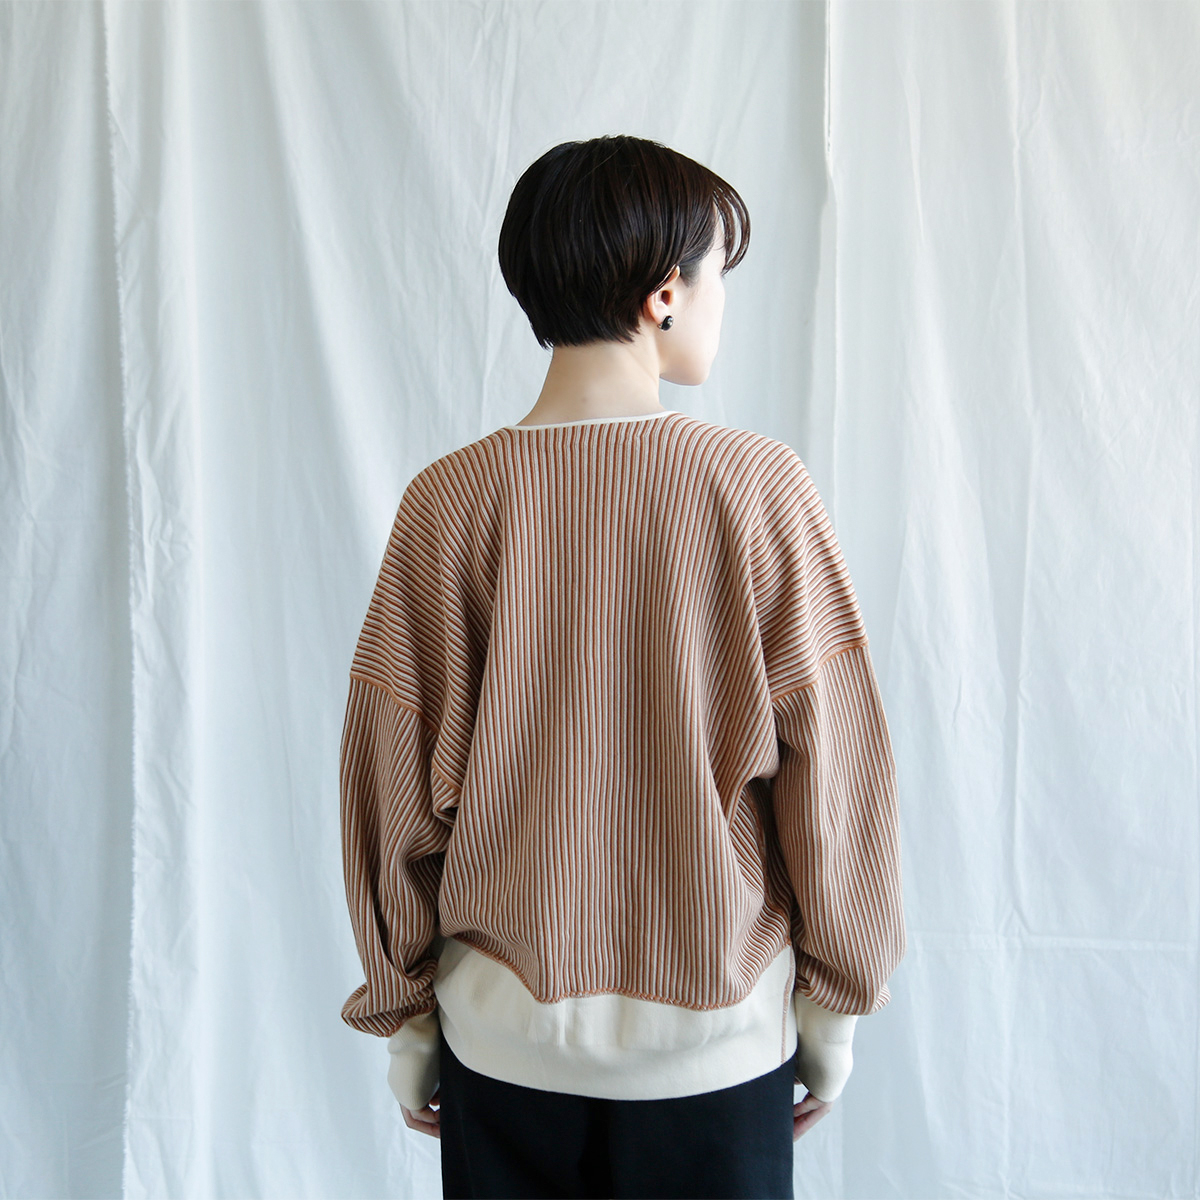 Olde H & Daughter(I[hGC`Ahh[^[)p[Xeb`J[fBKgPARL STITCH CARDIGAN FOR BED IN KNITh bk001-oldehanddaughter